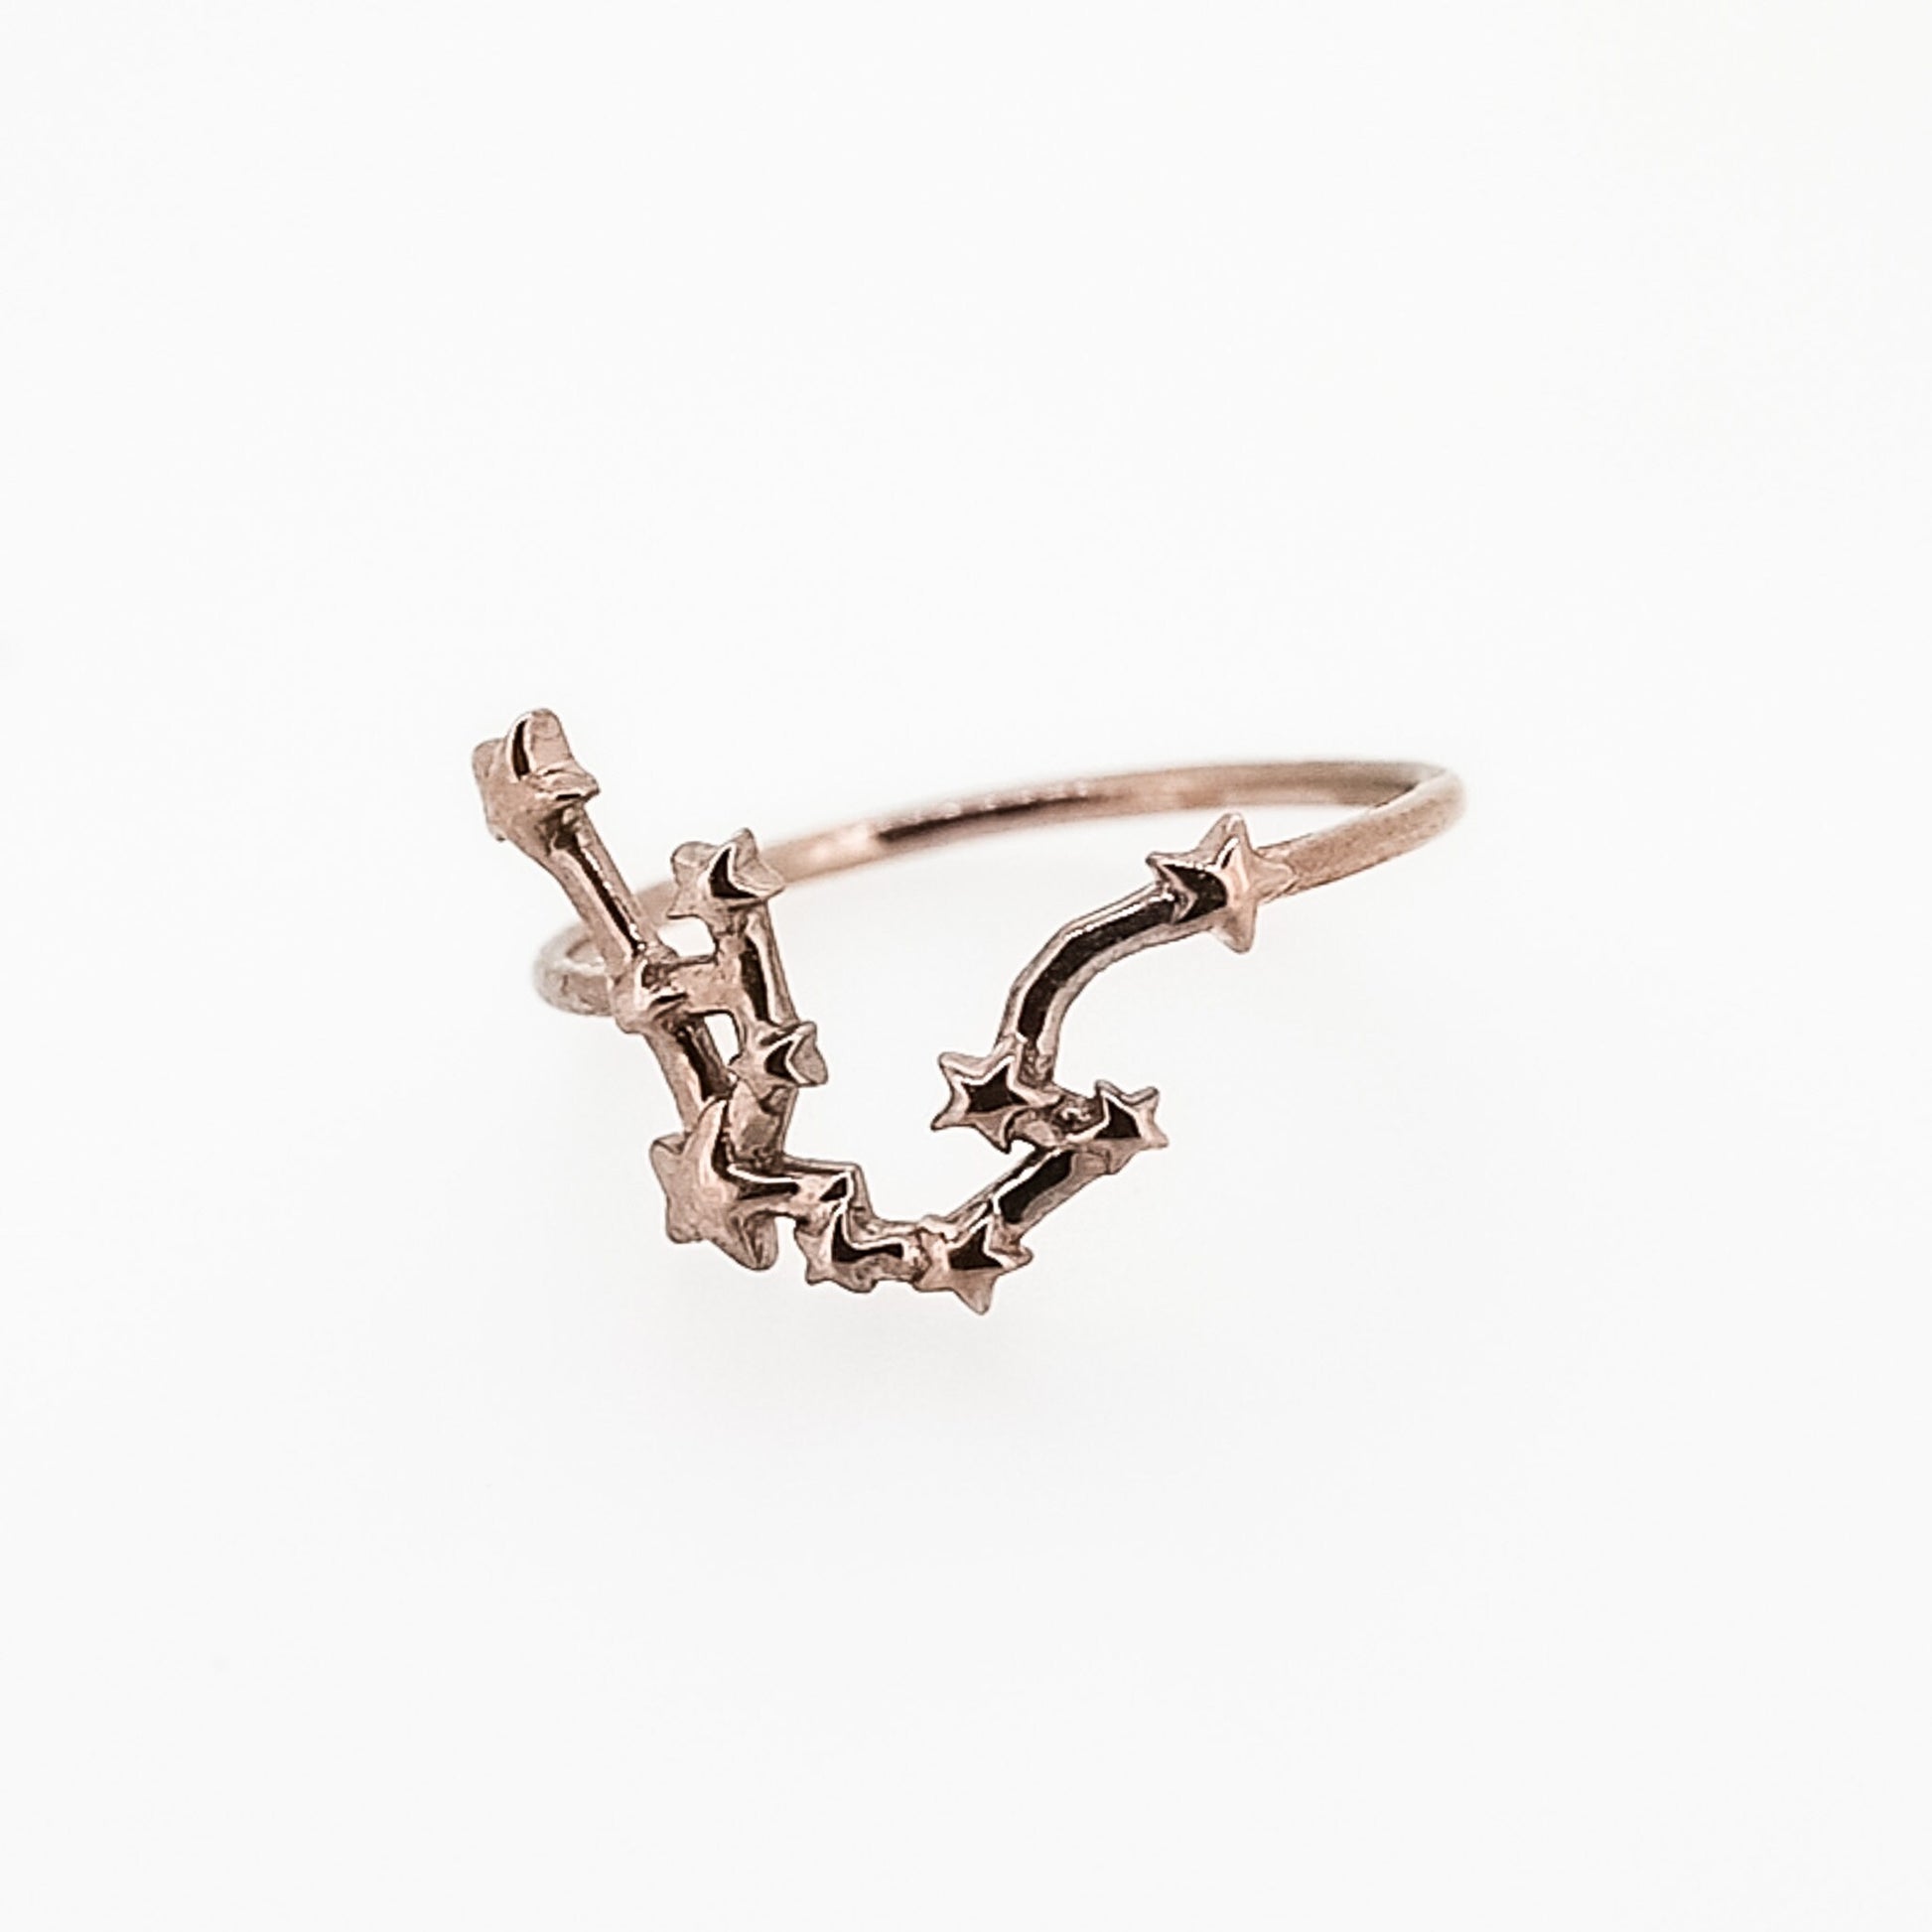 Solid Gold Aquarius, Star Sign Dainty Celestial Zodiac Ring in 4K Yellow Gold, 14k White Gold, 14K Rose Gold